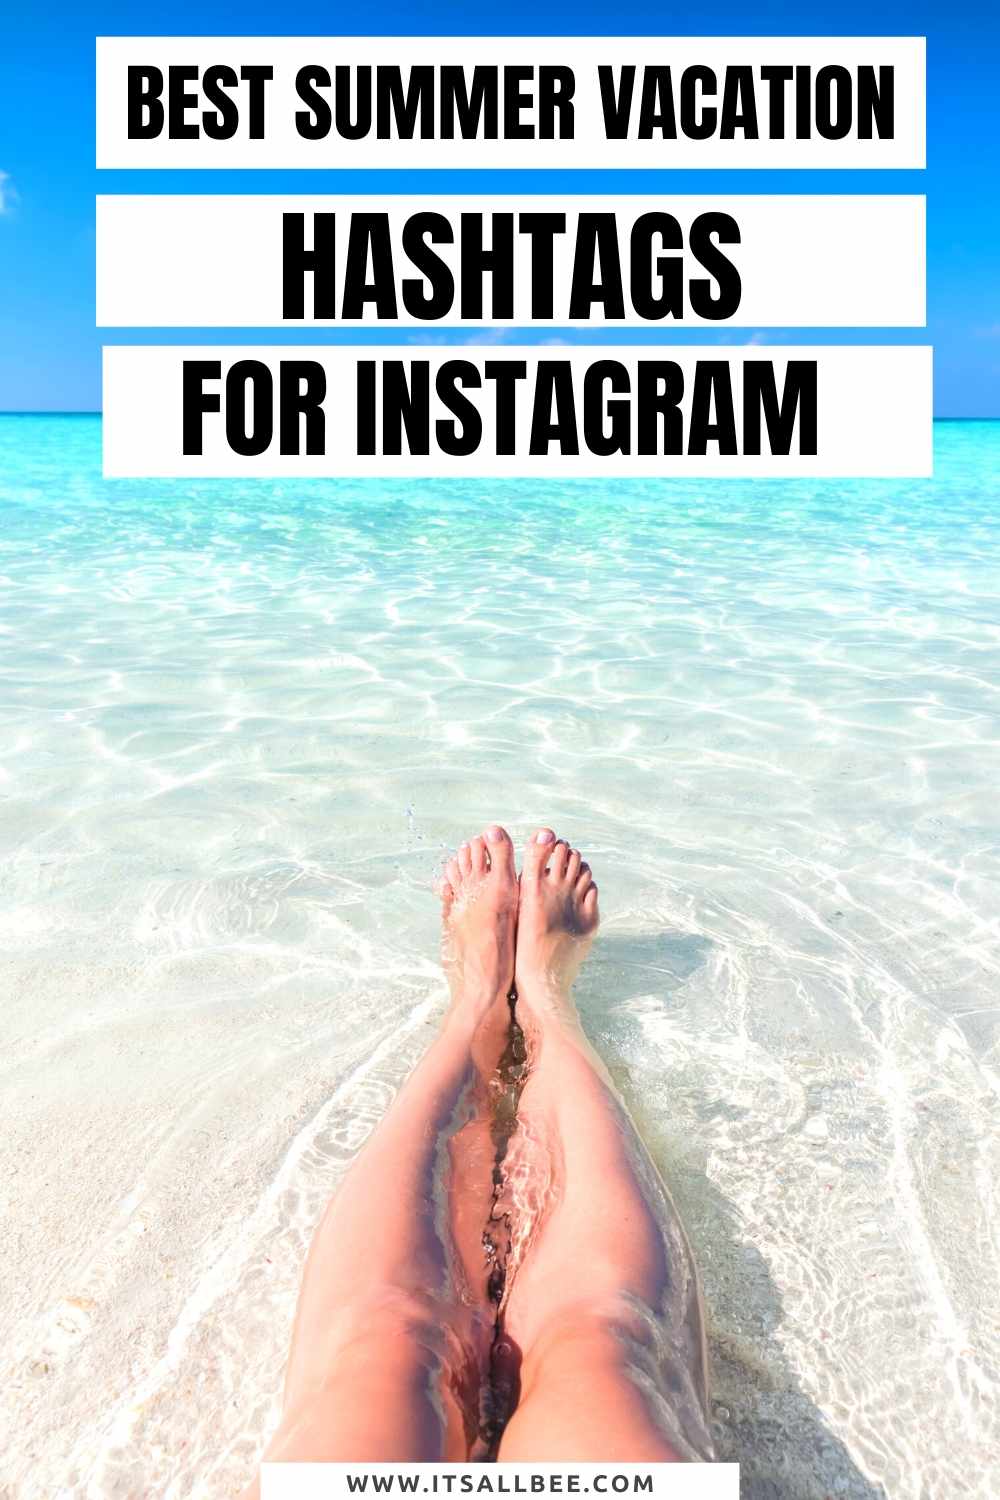 Best Vacation Hashtags For Instagram - skiing - beach - winter - family